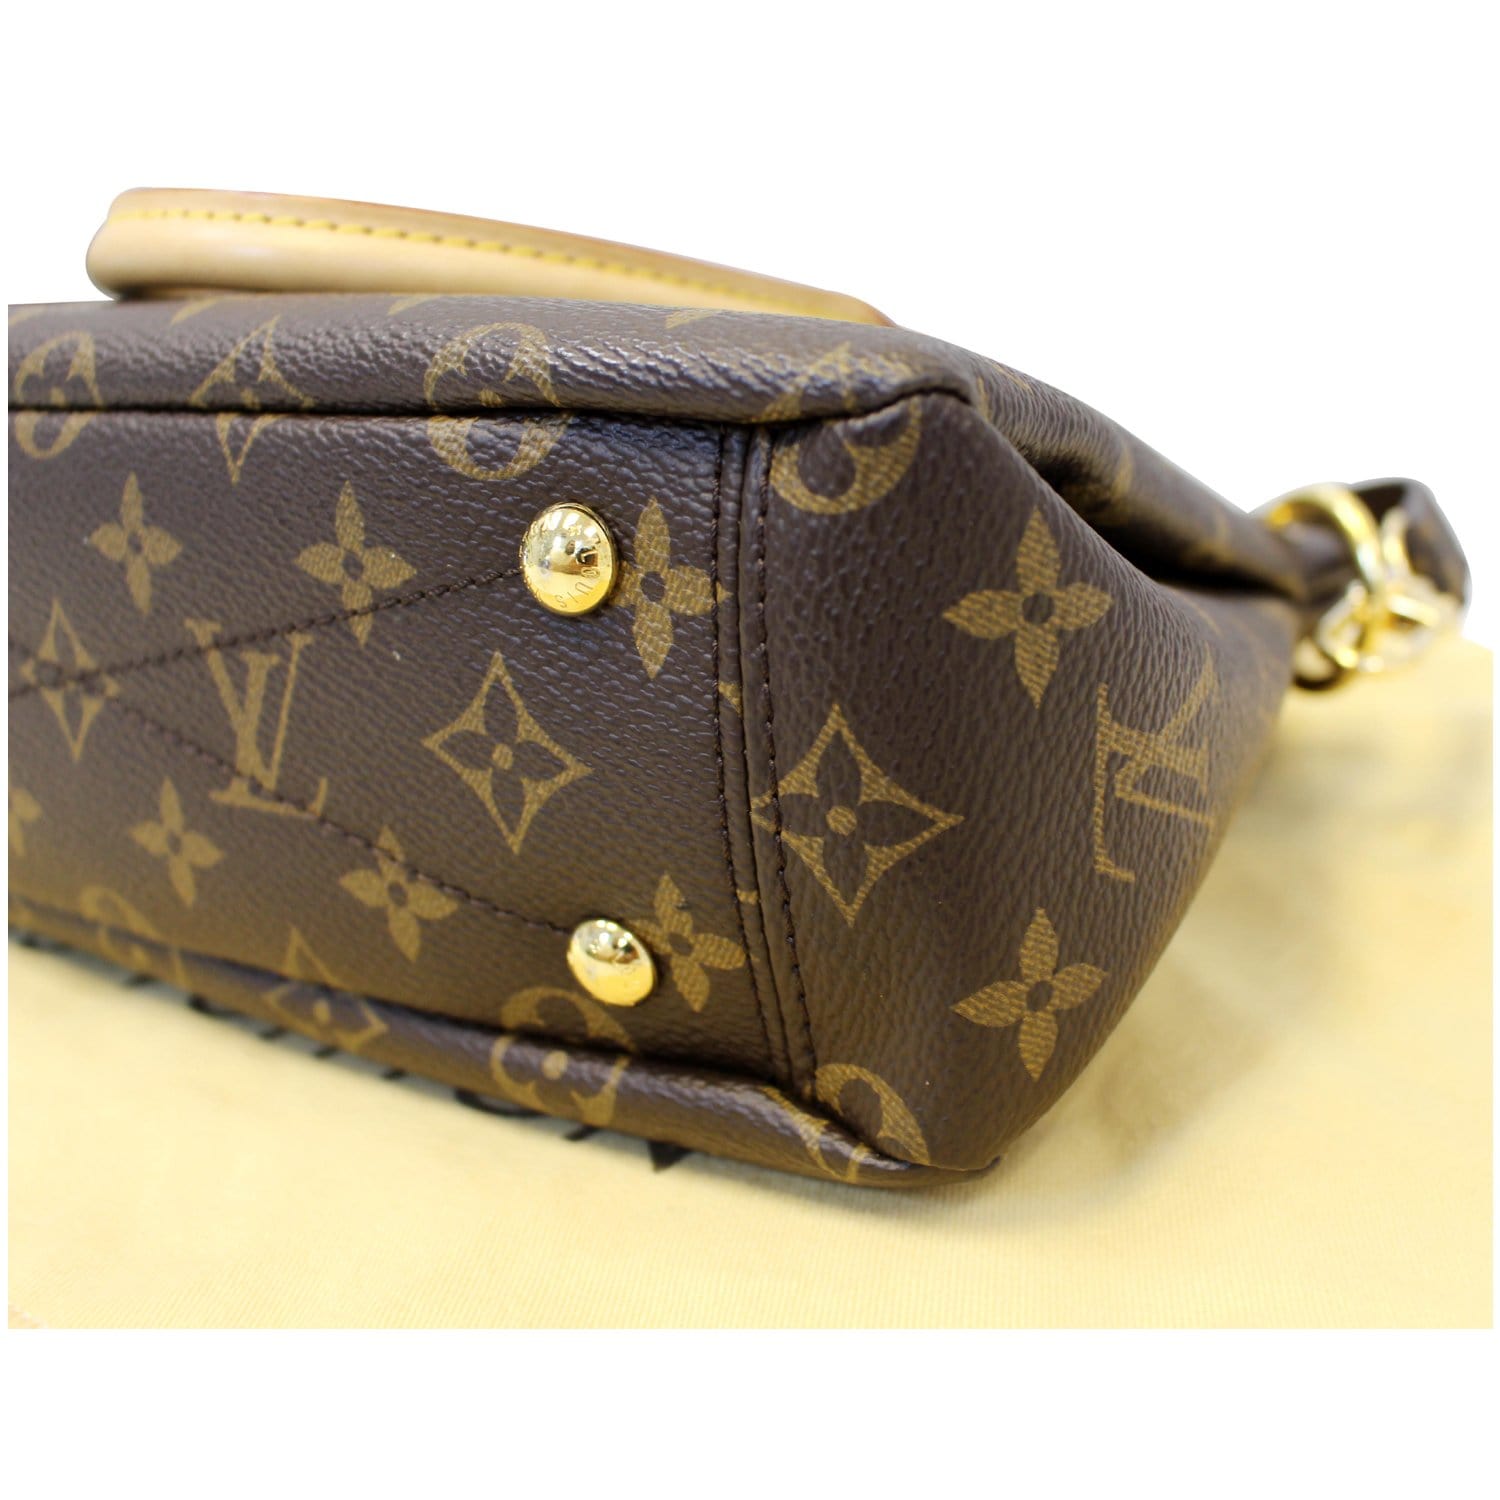 All in the Bag - Pallas BB Noir Pochette Vendeur Crossbody 💜SOLD💜 This is  a rare and unusual item!😍 This is the Louis Vuitton employee-purchase only  Pallas! If it seems familiar 